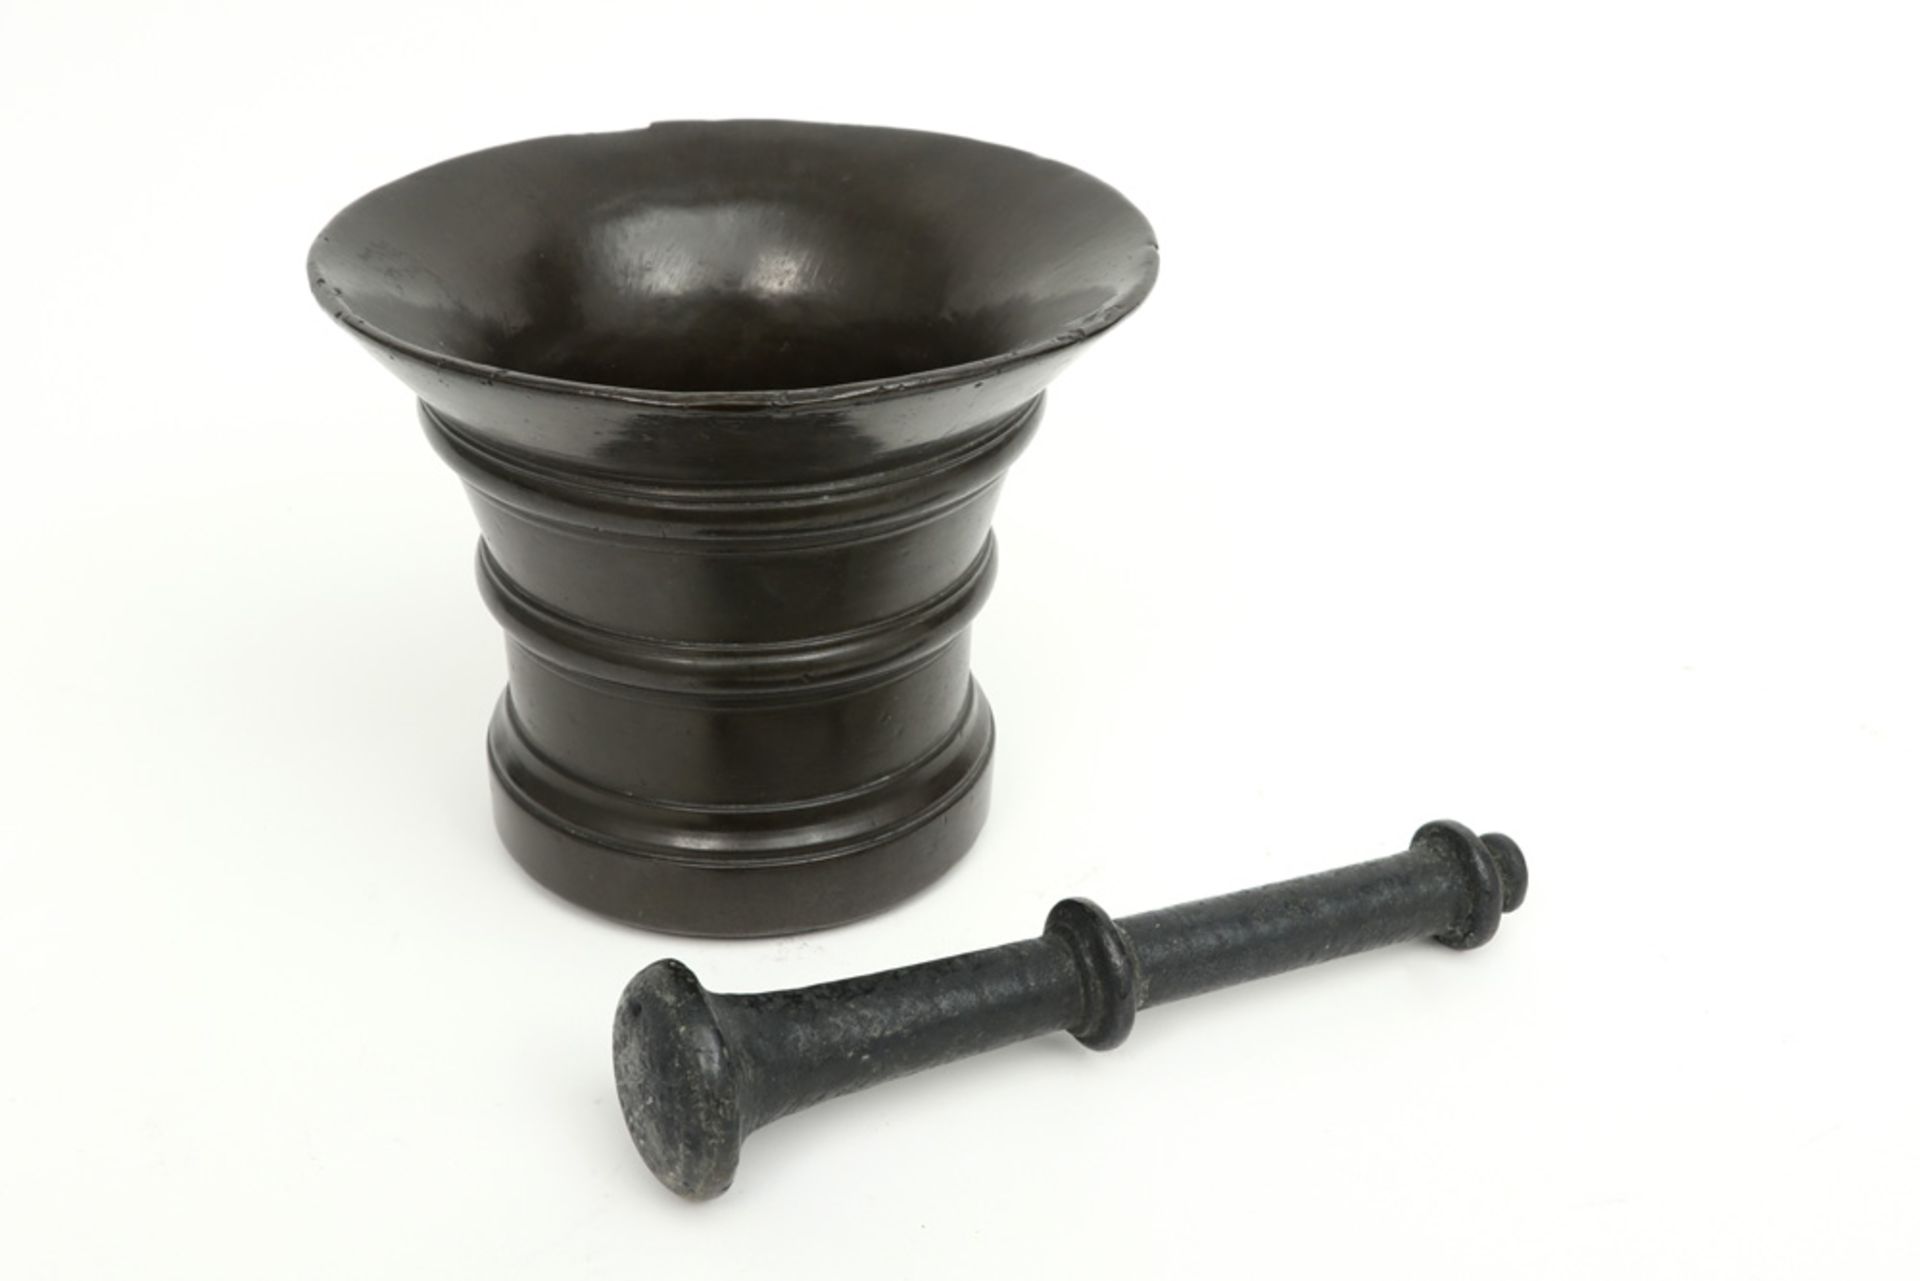 17th/18th Cent. mortar (with its pestle) in bronze with a nice patina - Image 2 of 4